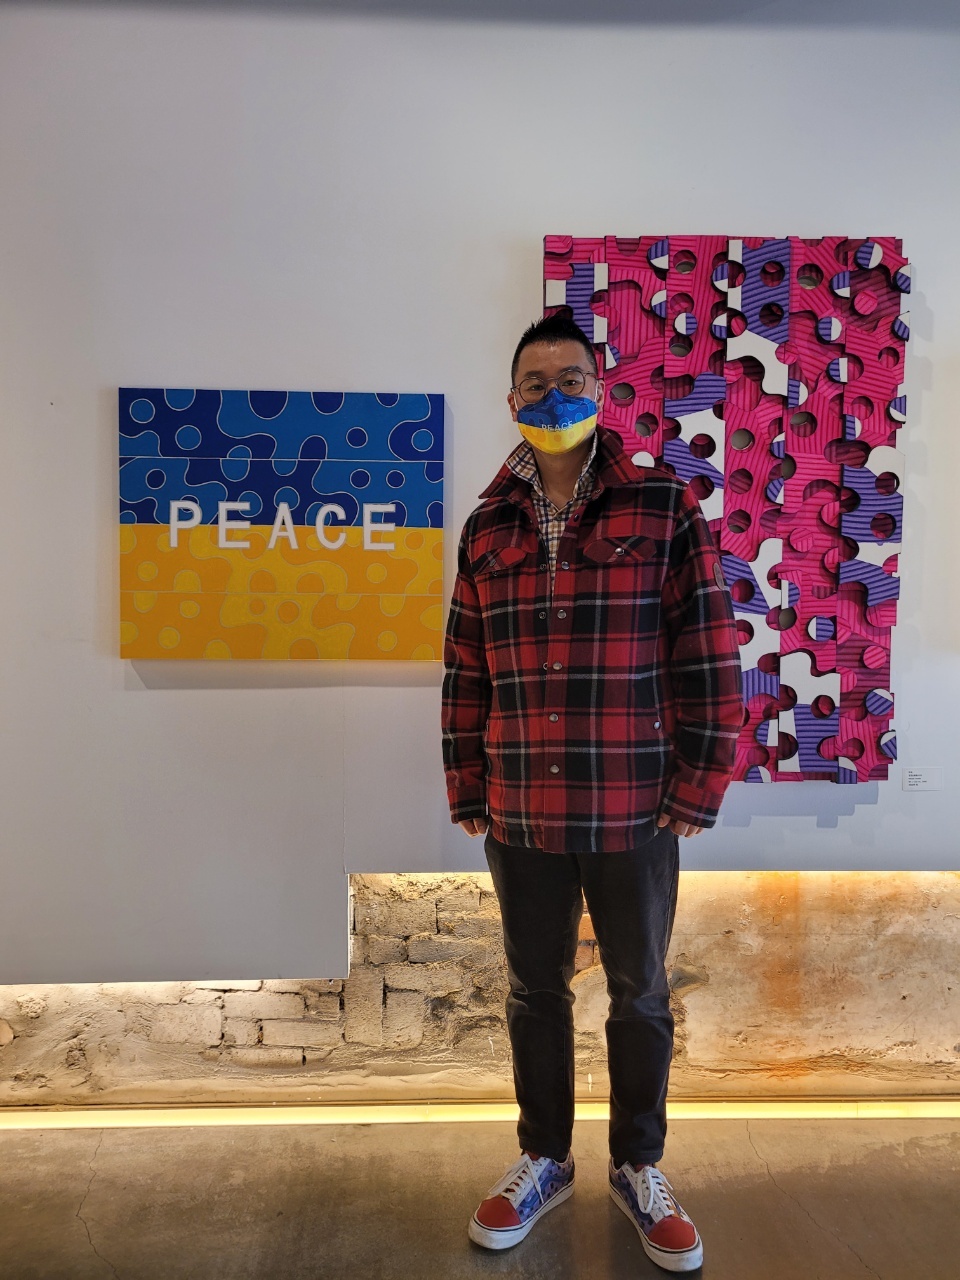 Heo Wook stands next to his painting “PEACE in Ukraine” wearing a face mask designed with the image at Jeongdong 1928 Gallery in Seoul. (Park Yuna/The Korea Herald)